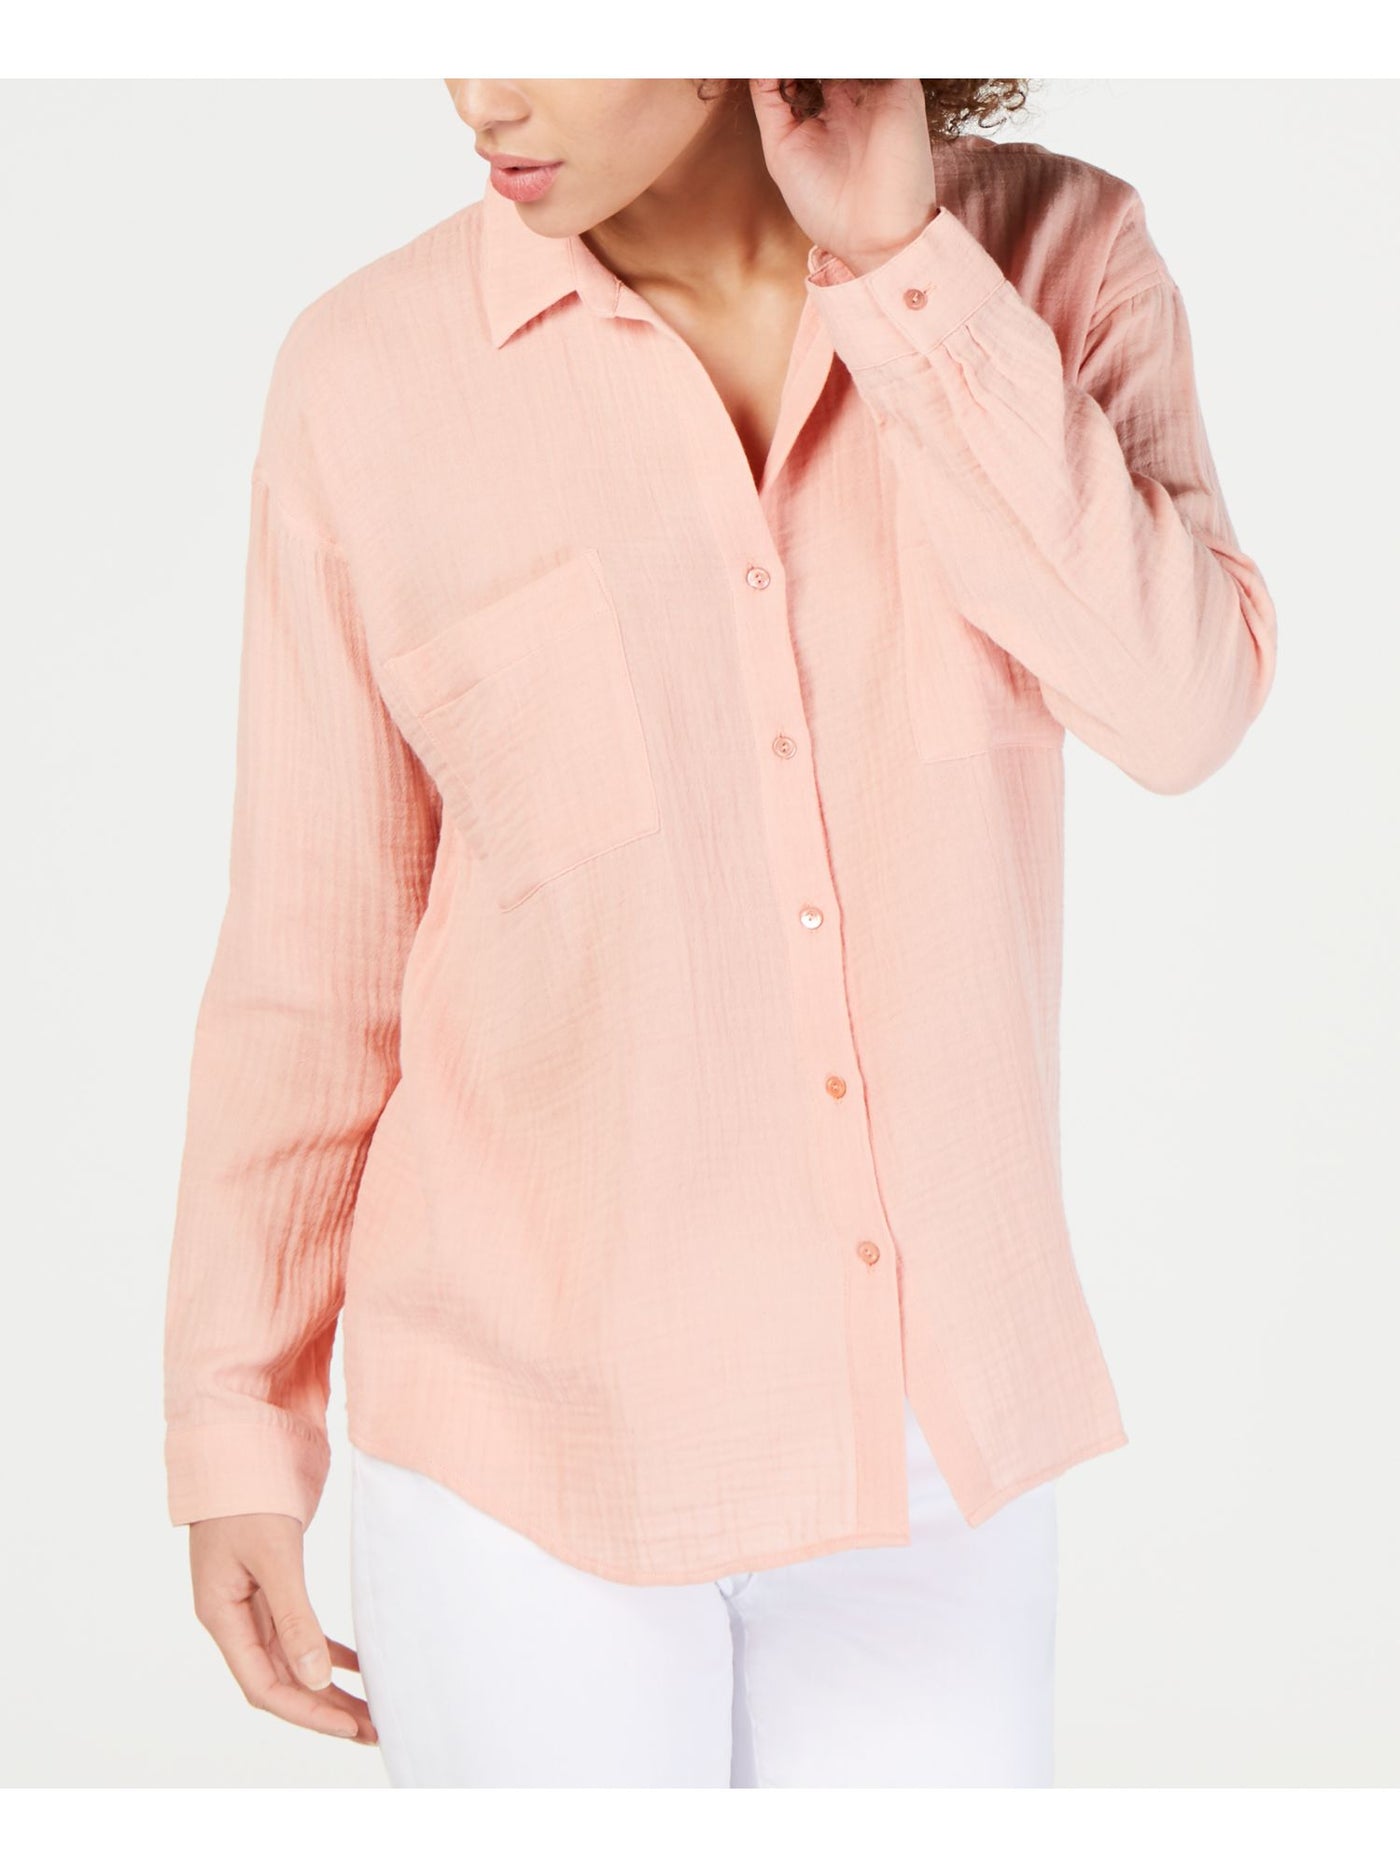 EILEEN FISHER Womens Coral Long Sleeve Collared Top XS